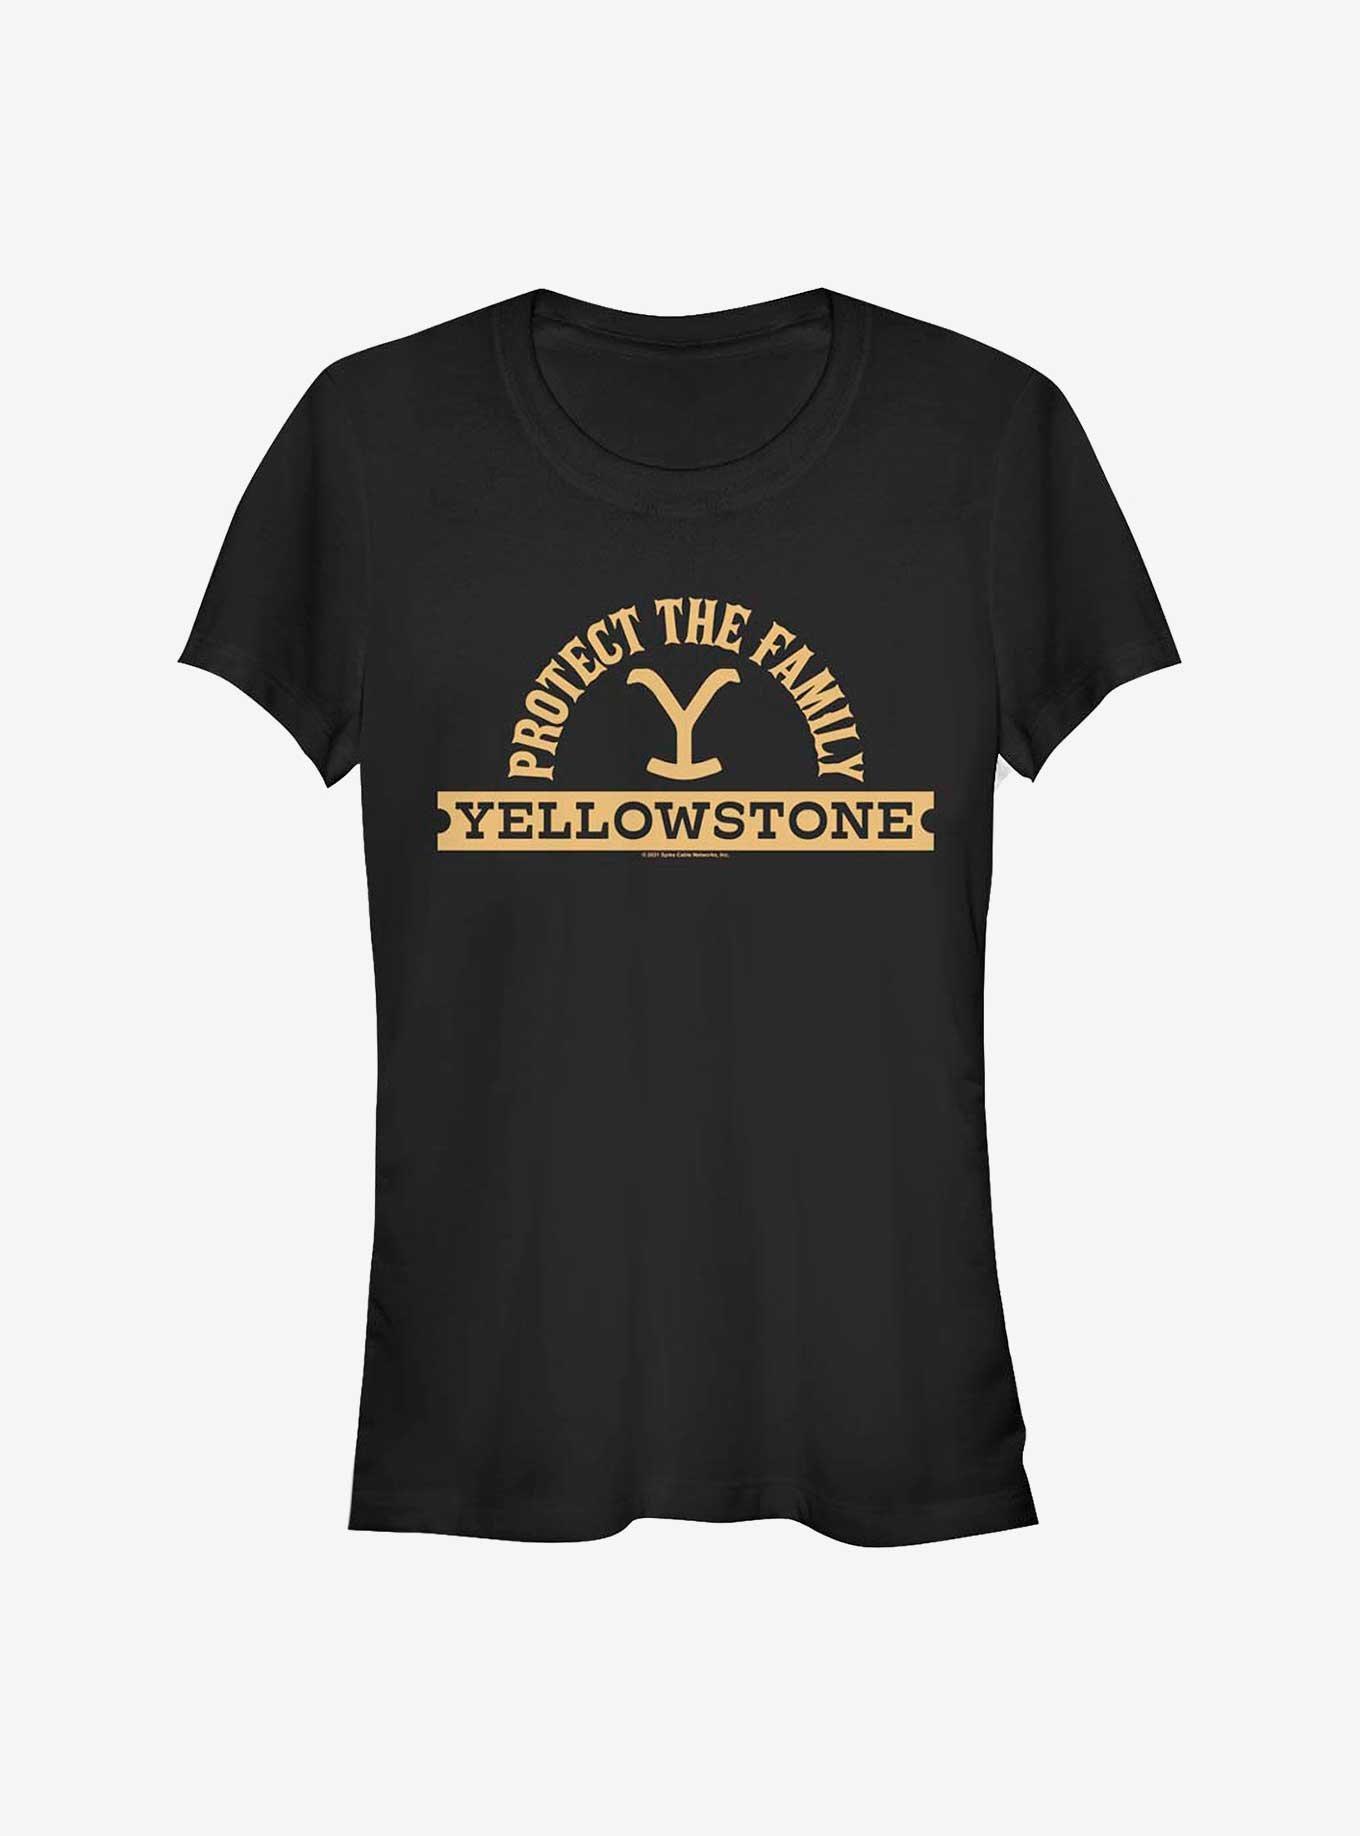 Yellowstone Protect The Family Girls T-Shirt, BLACK, hi-res